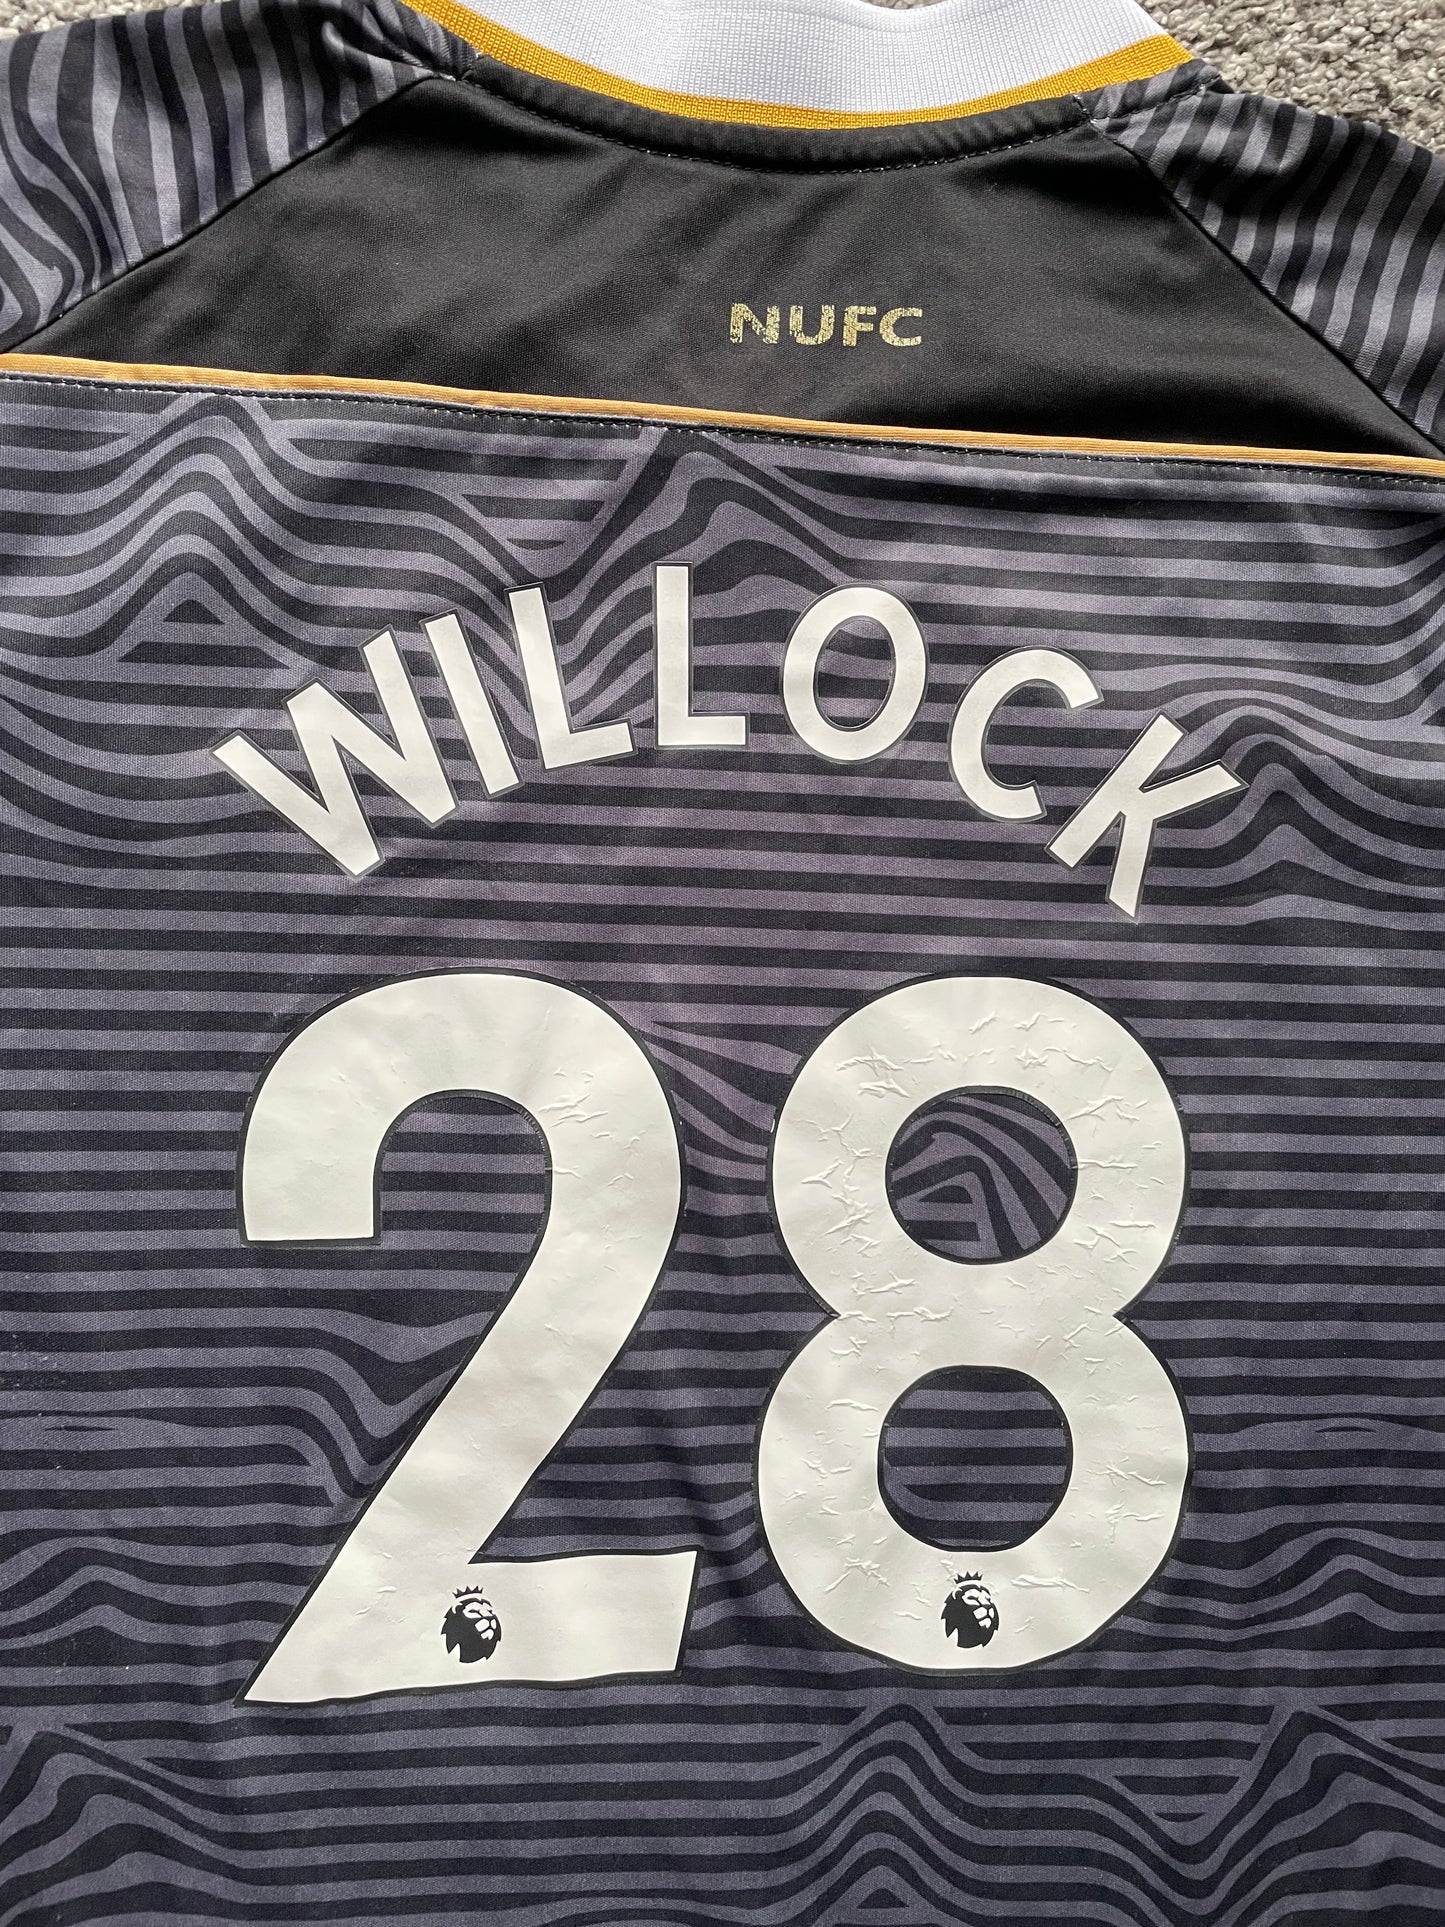 Newcastle 2021 Away Shirt WILLOCK 28 (very good) Adults XS / Youths 28